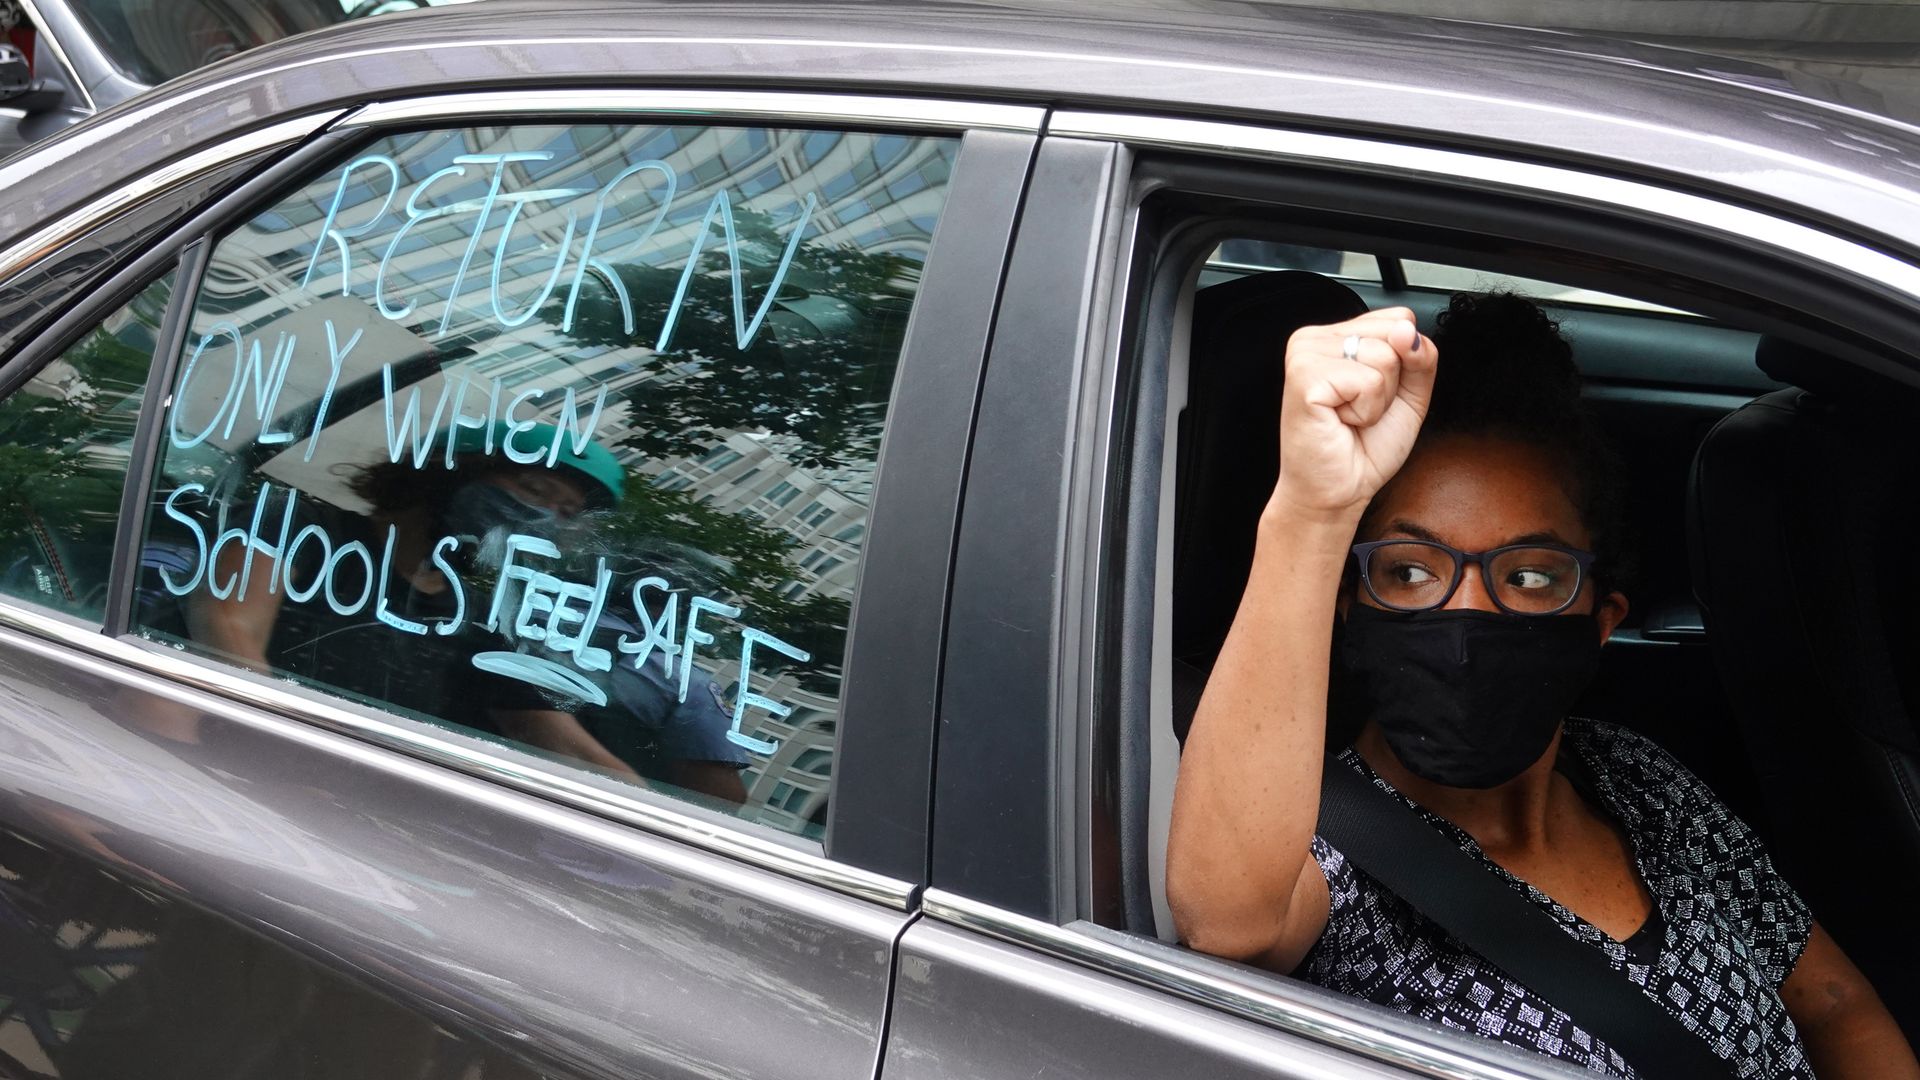 CHICAGO: Demonstrators participate in a car caravan protest calling for public school classes to be held remotely when school begins on August 03, 2020 in Chicago. (Photo by Scott Olson/Getty Images)